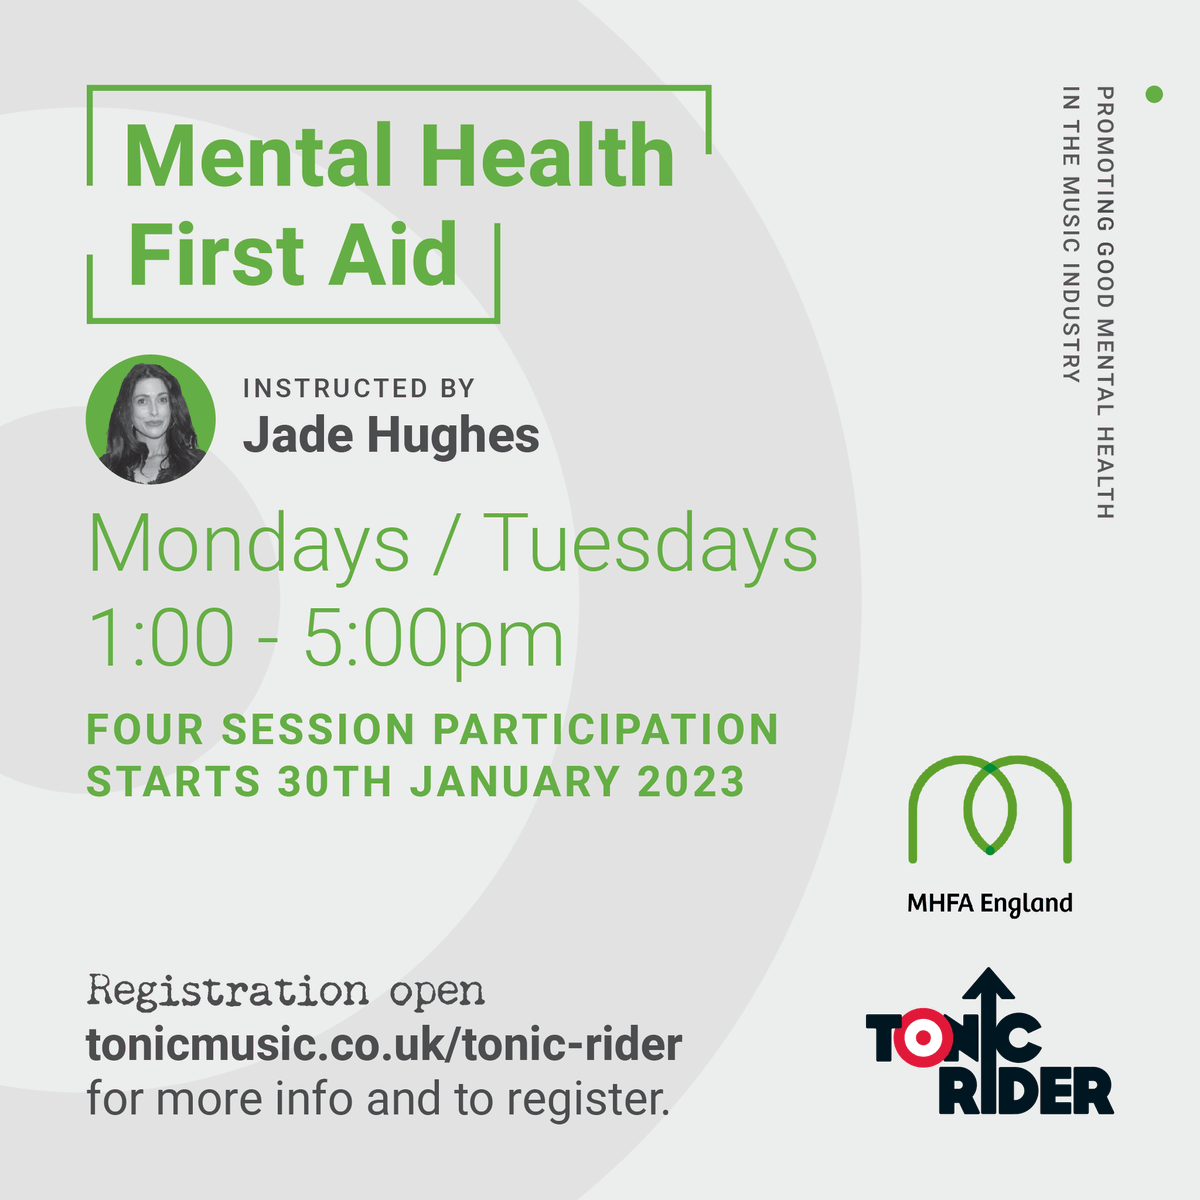 FREE Mental Health First Aid for working musicians and music industry professionals based in England...

Limited time to register!

#TonicRider #FirstAid #MentalHealth #Wellbeing #MusicIndustry